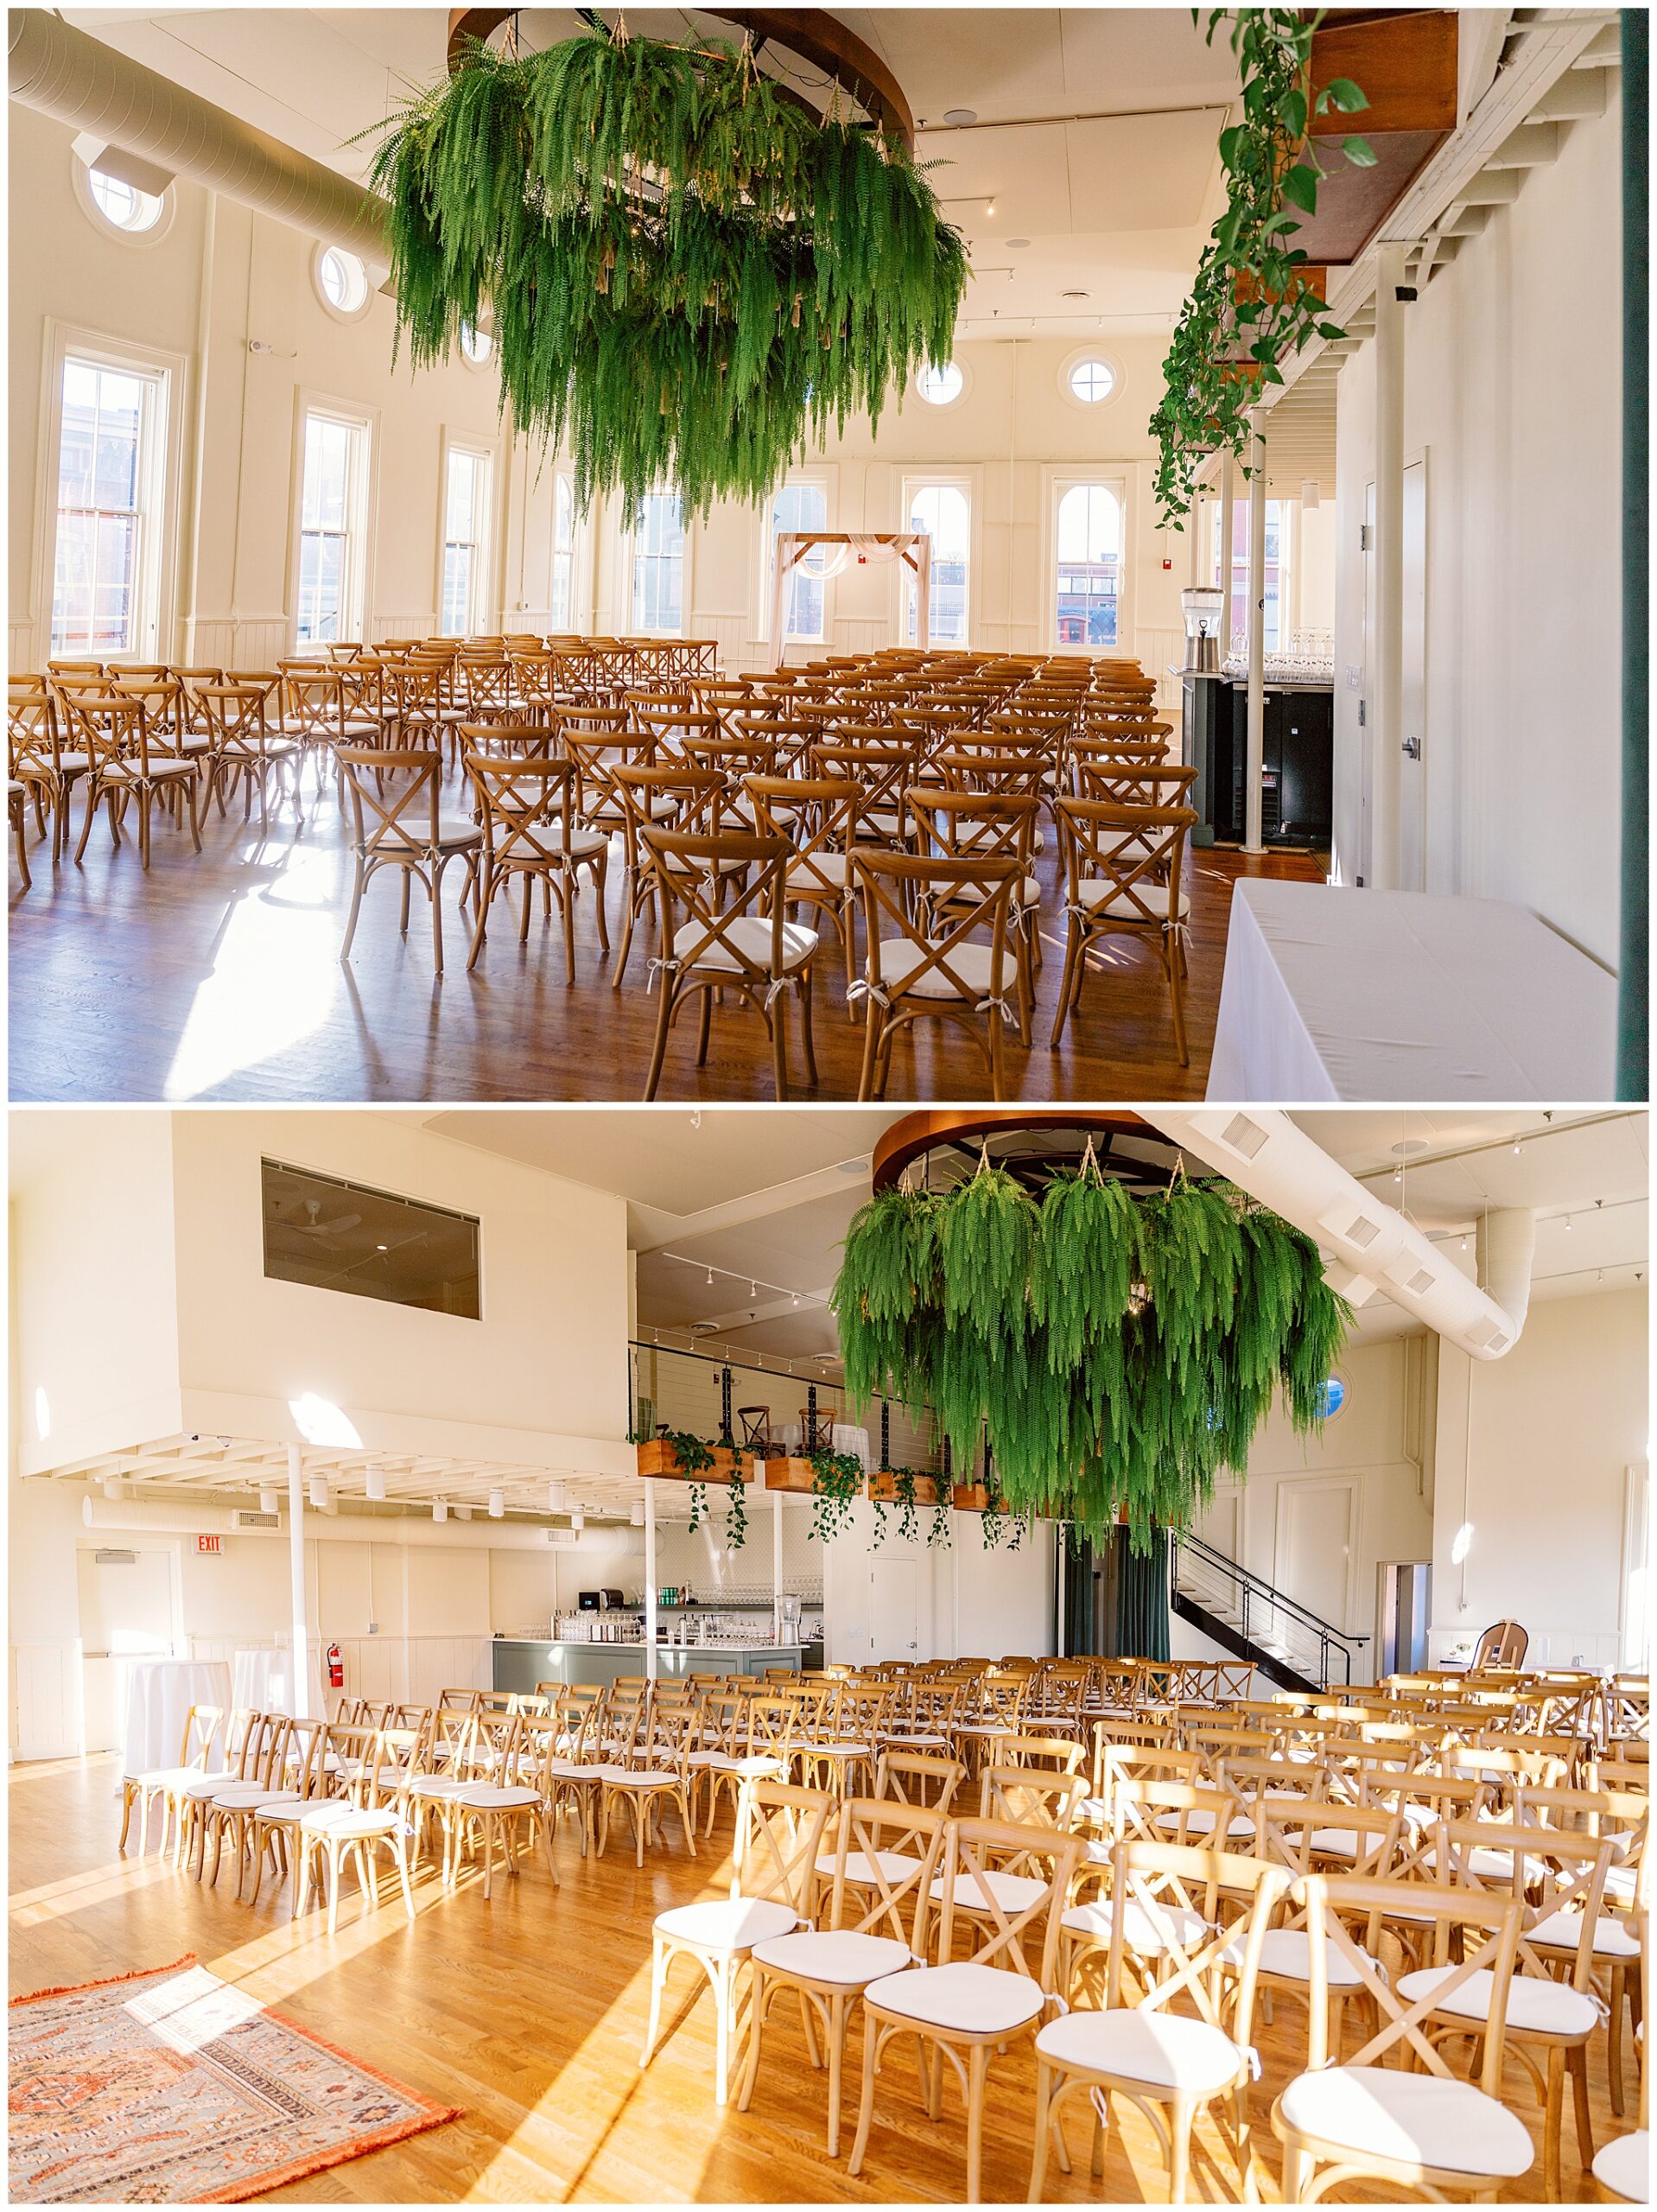 A ceremony setup with wooden chairs on a wooden floor with tall windows all around and greenery hanging from the ceiling and walls madtree alcove wedding